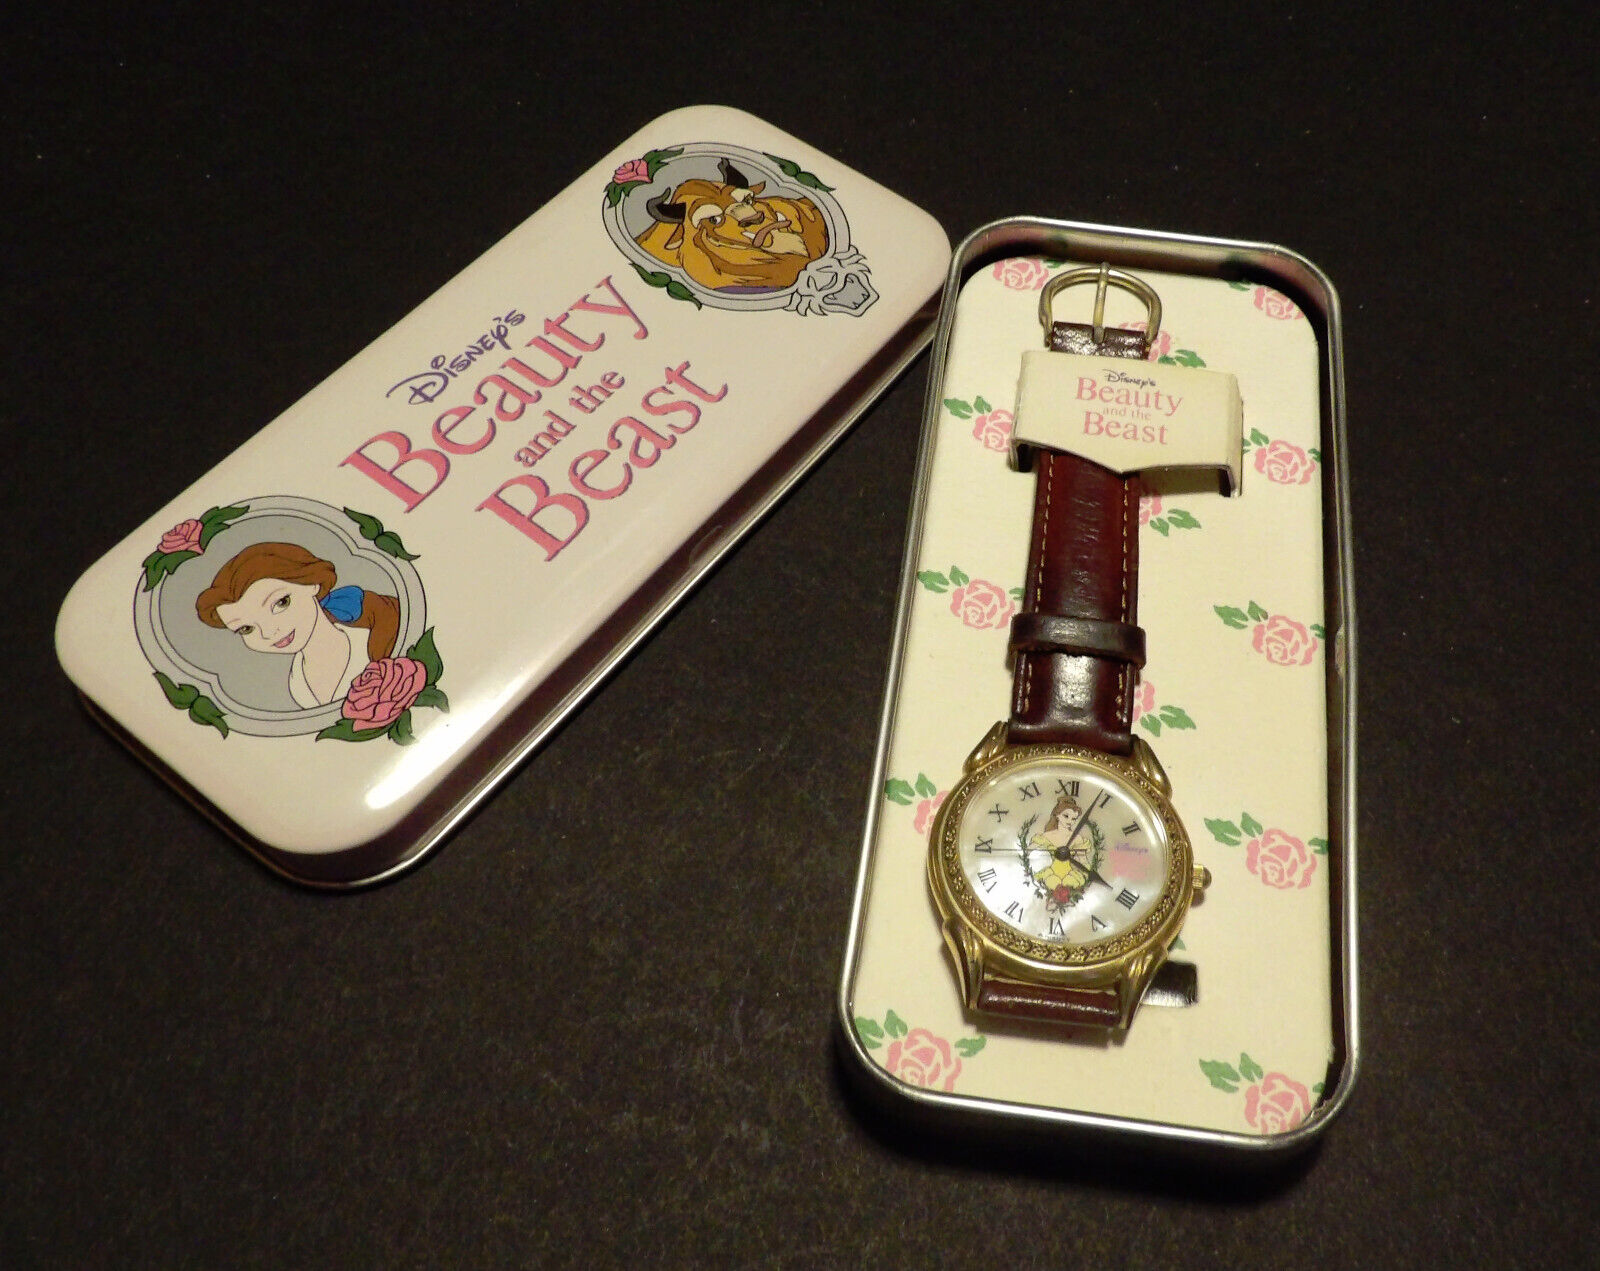 MINT in BOX Vintage 1990s Beauty and the Beast Disney Store Exclusive Watch